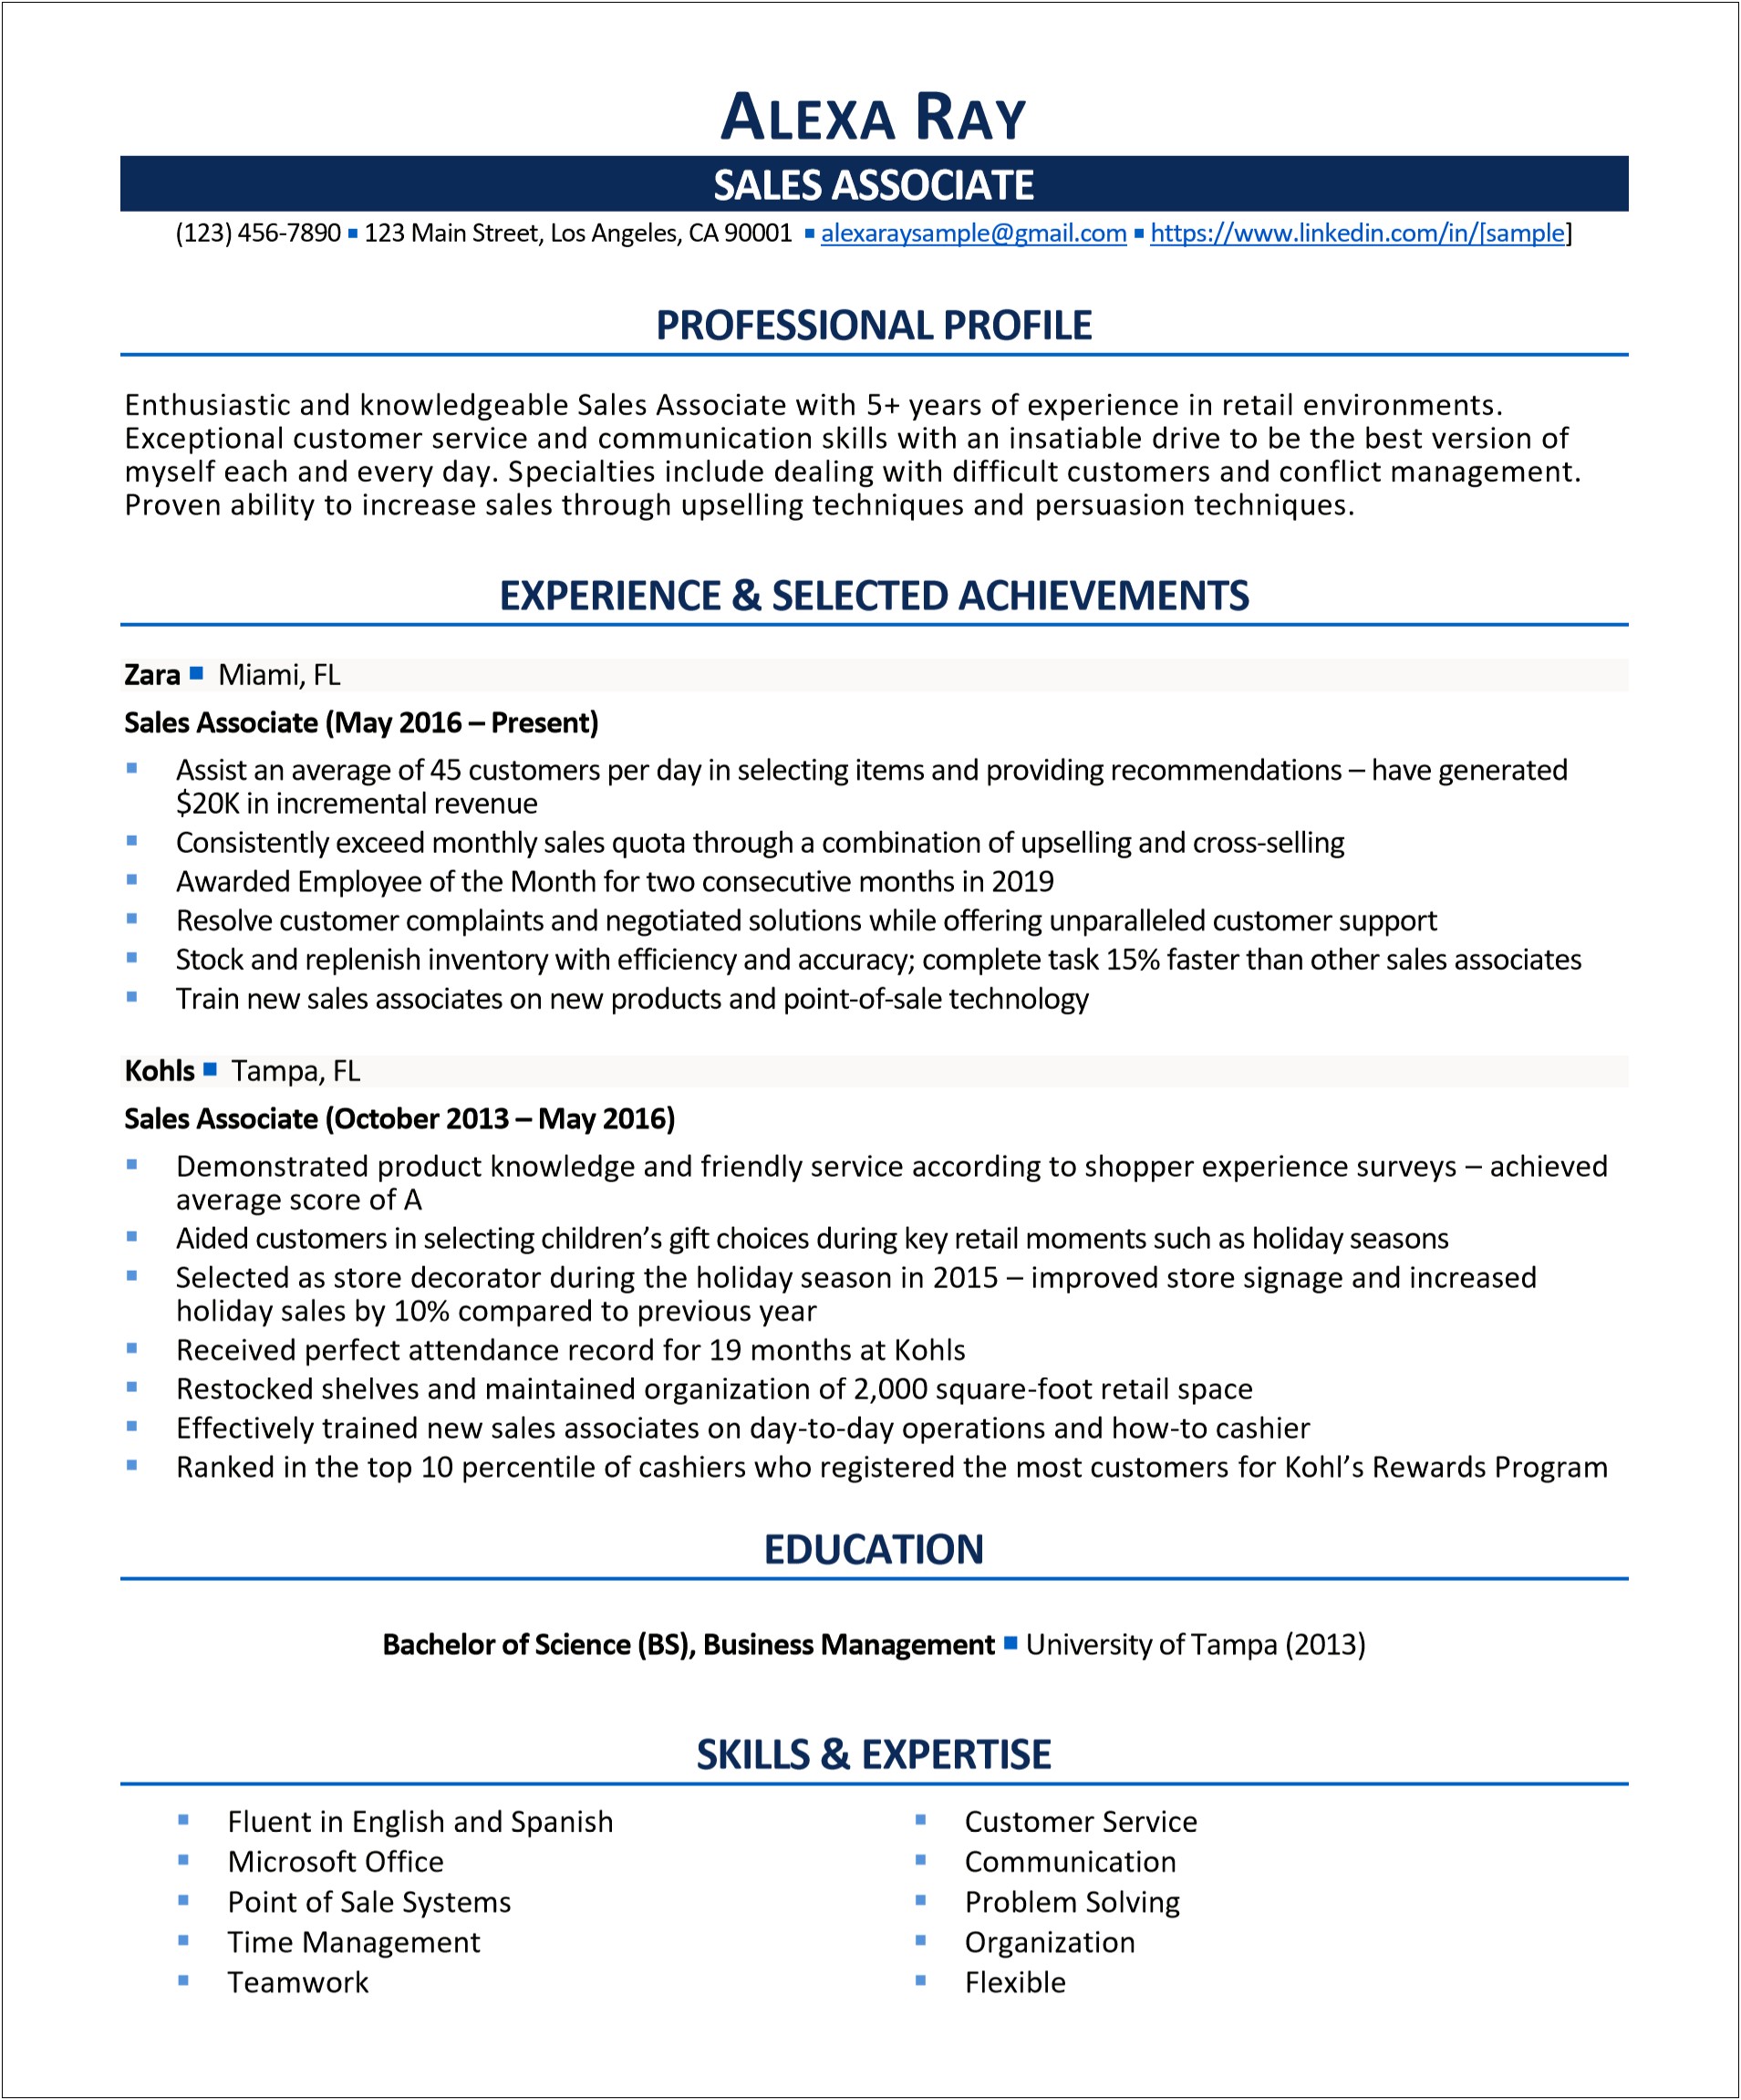 Sales Associate Resume Experience Examples